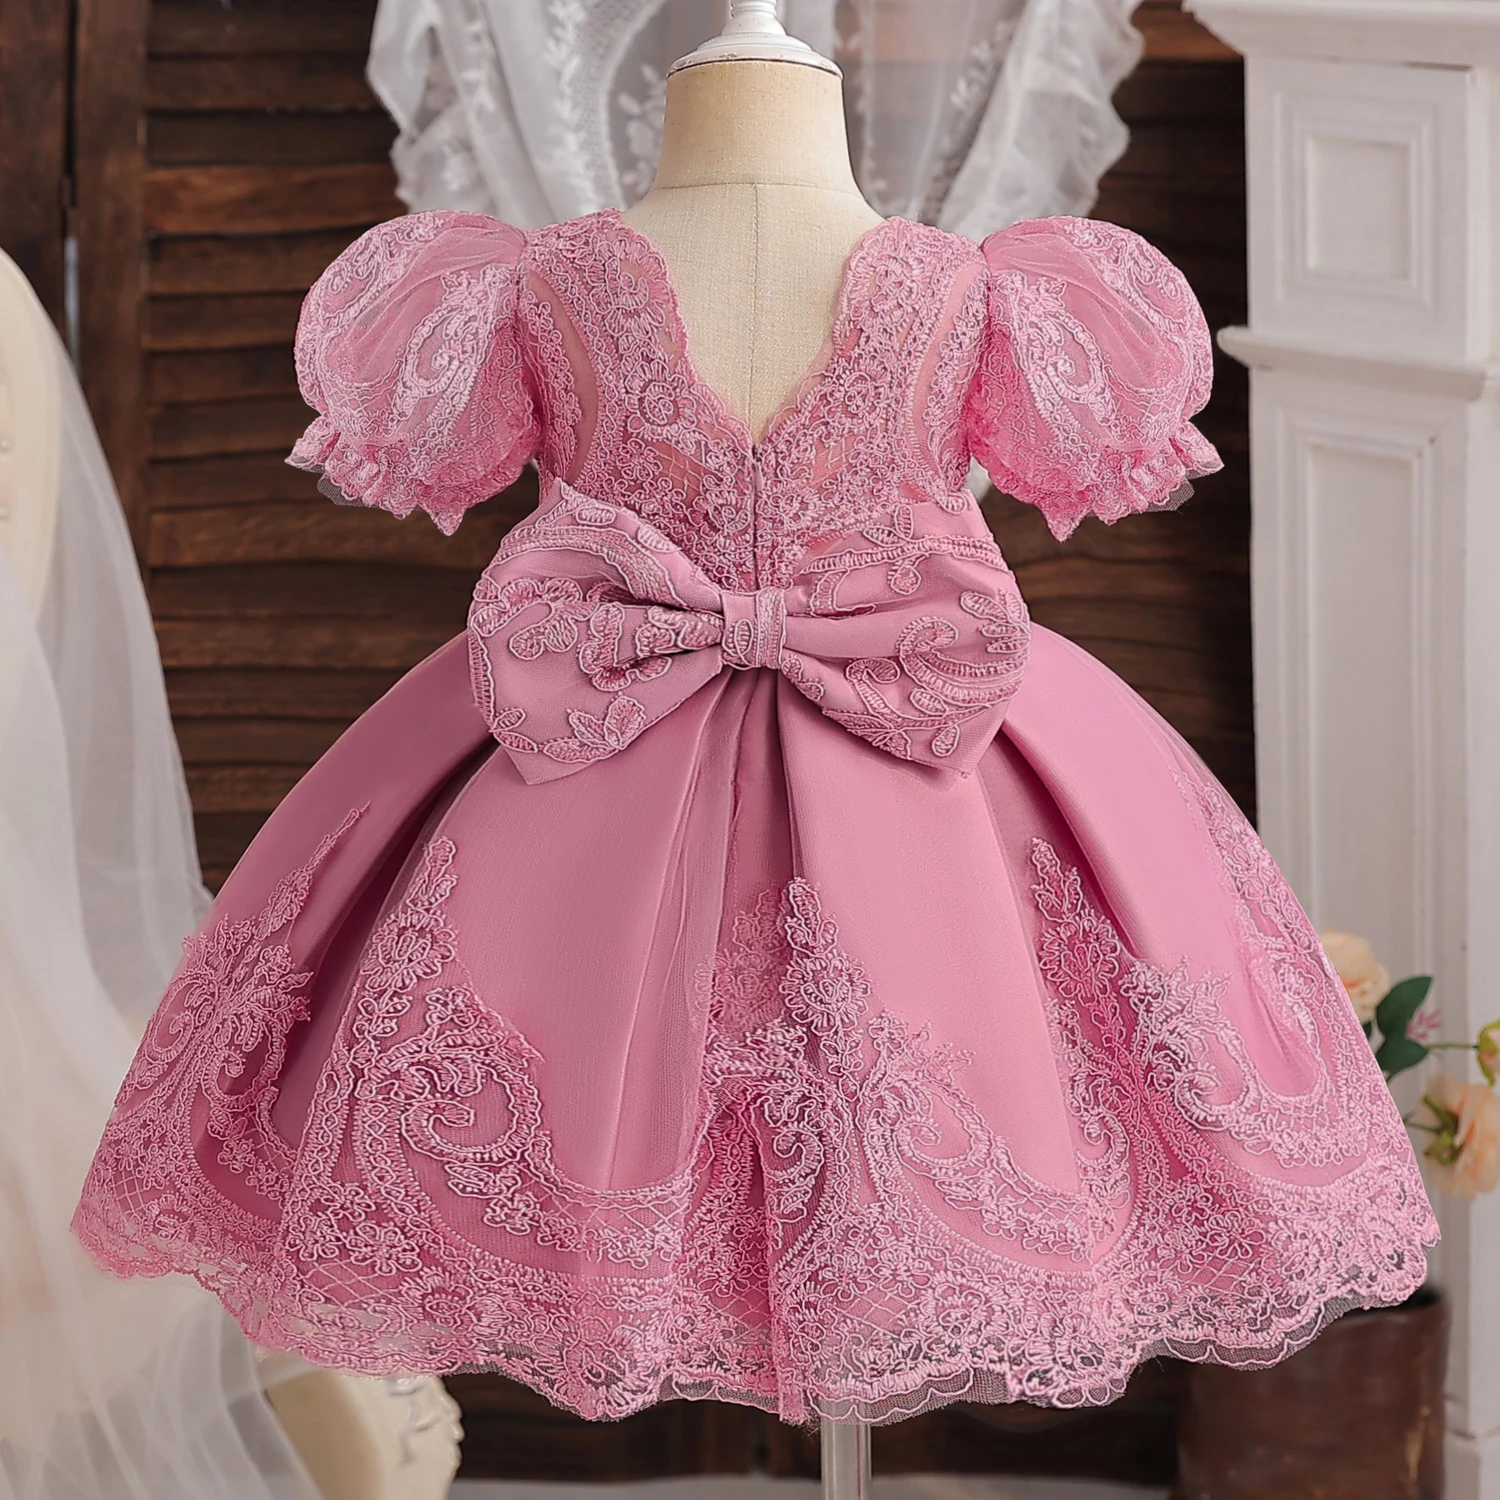 Cute Baby Lace Flower Tutu Gown Wedding Party Bow Beading Princess Girl Dress Inafnt Pink 1st Birthday Outfits Formal Gala Cloth